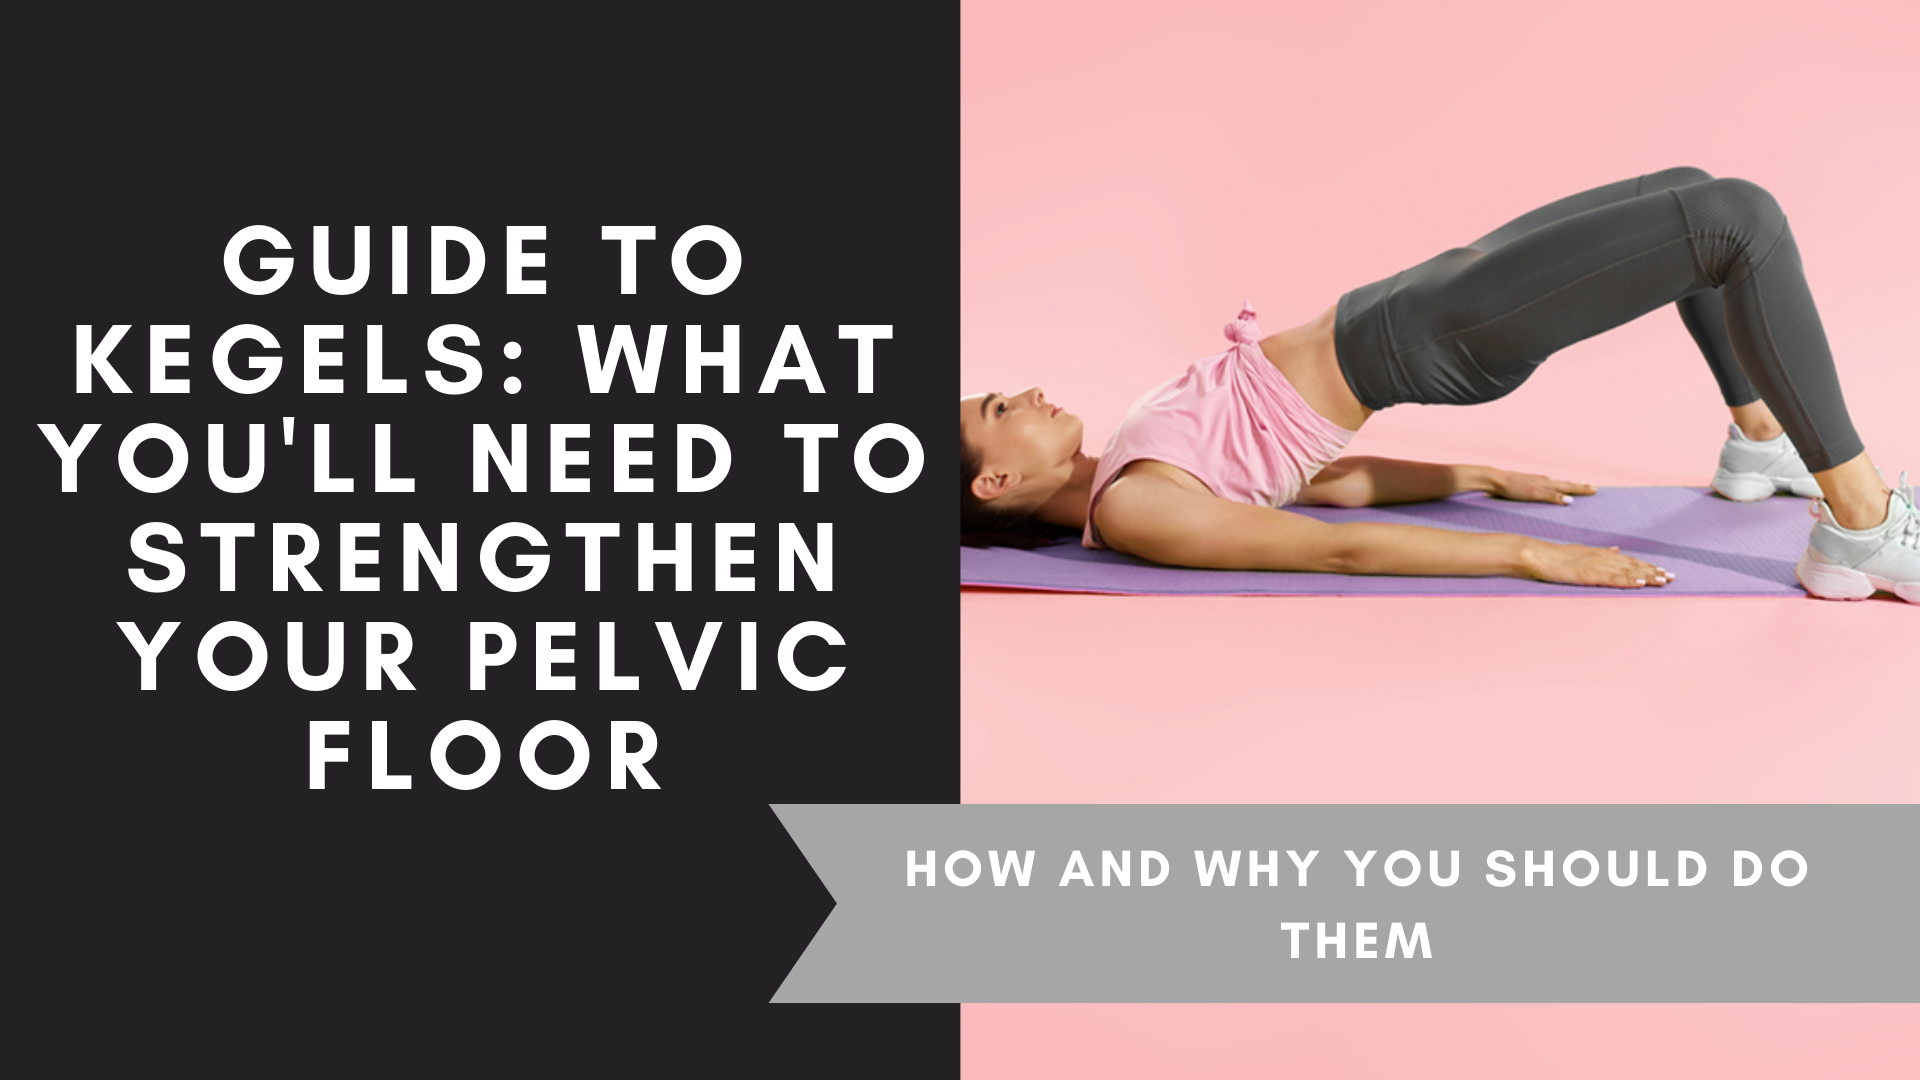 Guide to Kegels What You’ll Need to Strengthen Your Pelvic Floor, August 2021